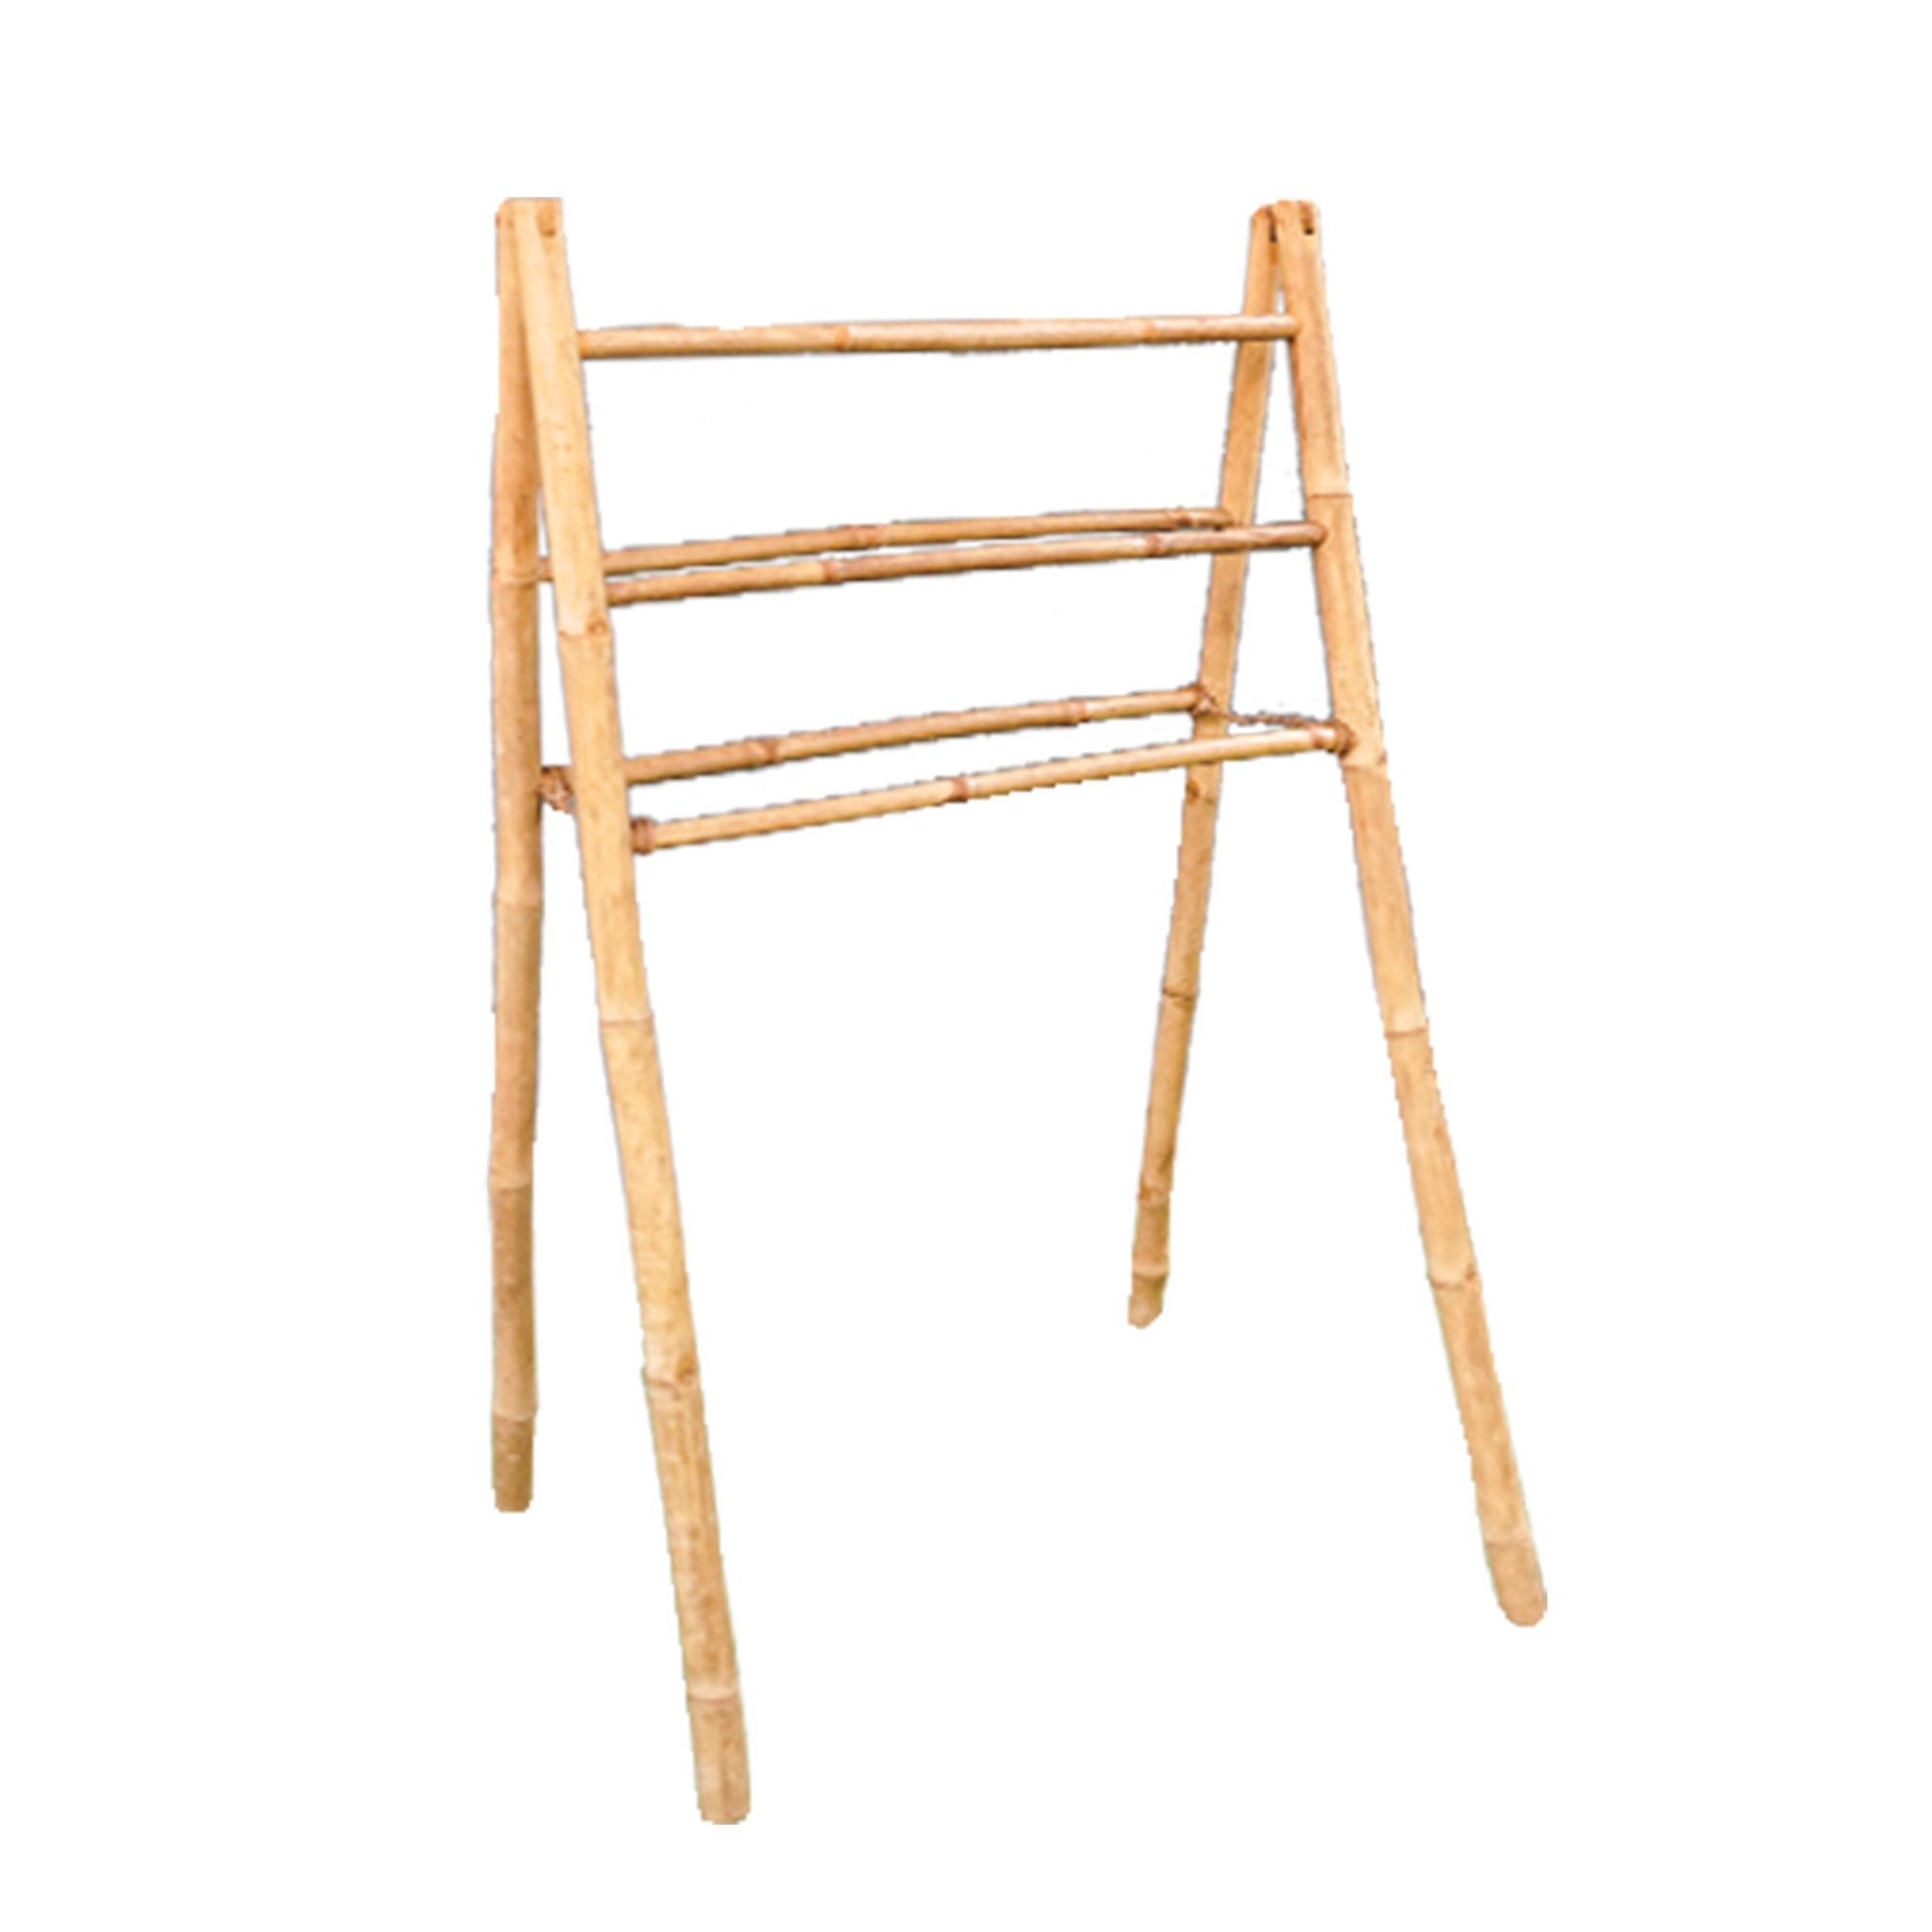  Bamboo Double Ladder 